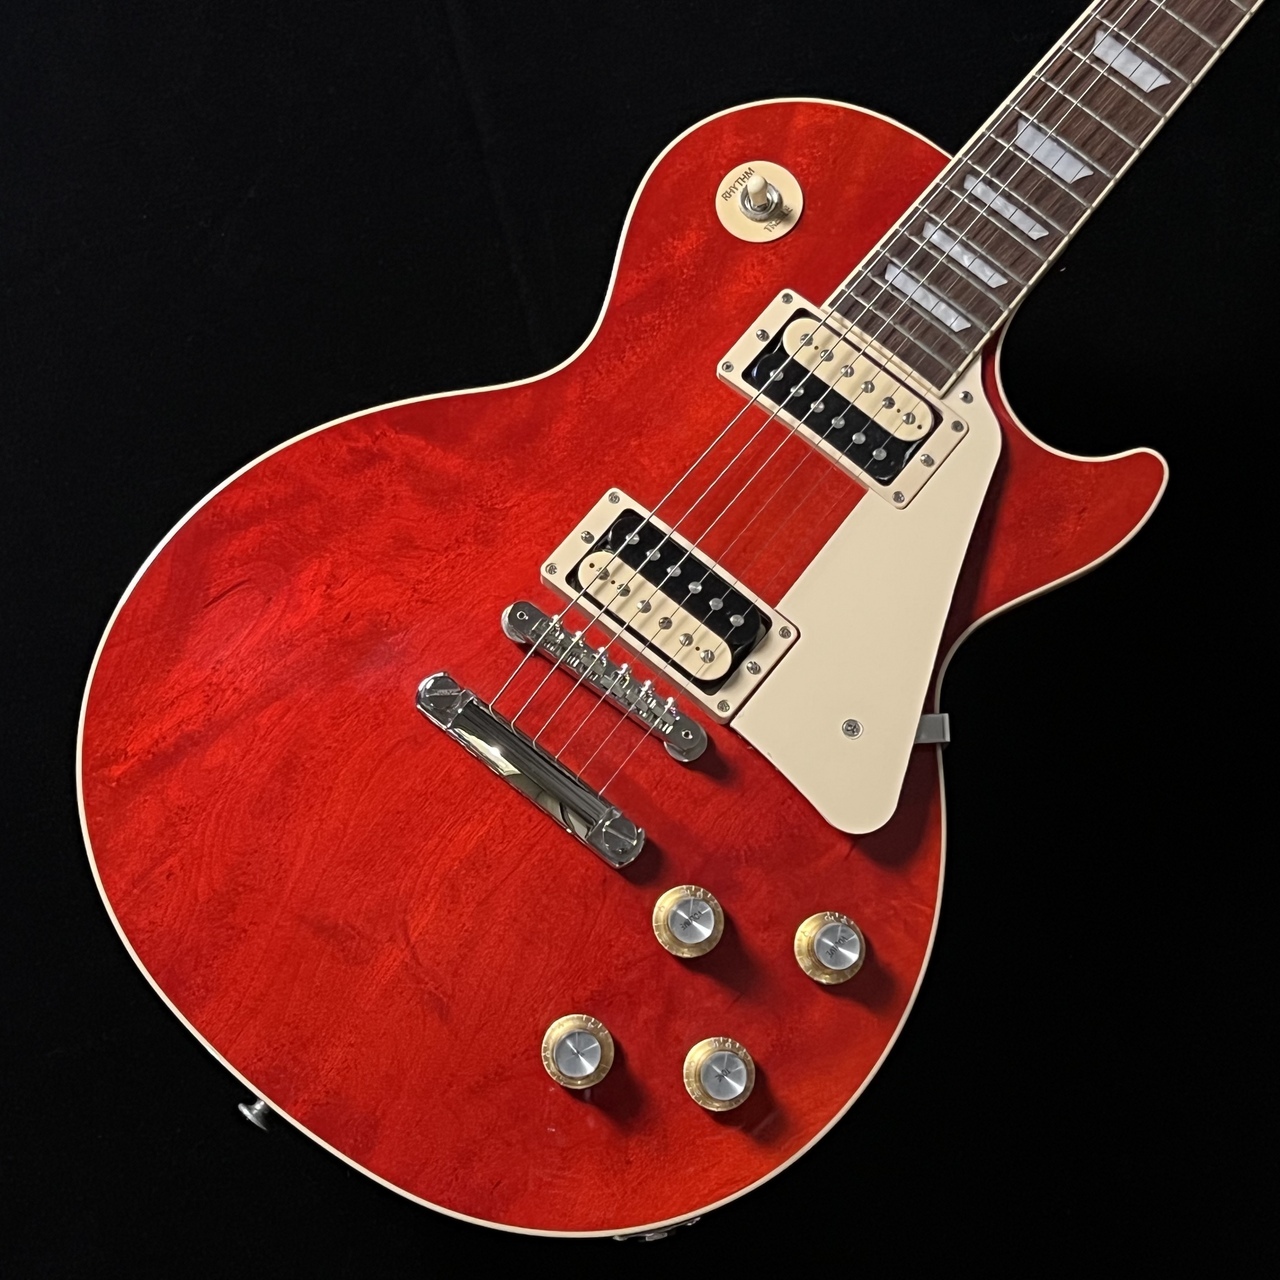 Gibson Les Paul Classic【Translucent Cherry】【S/N:207630364 